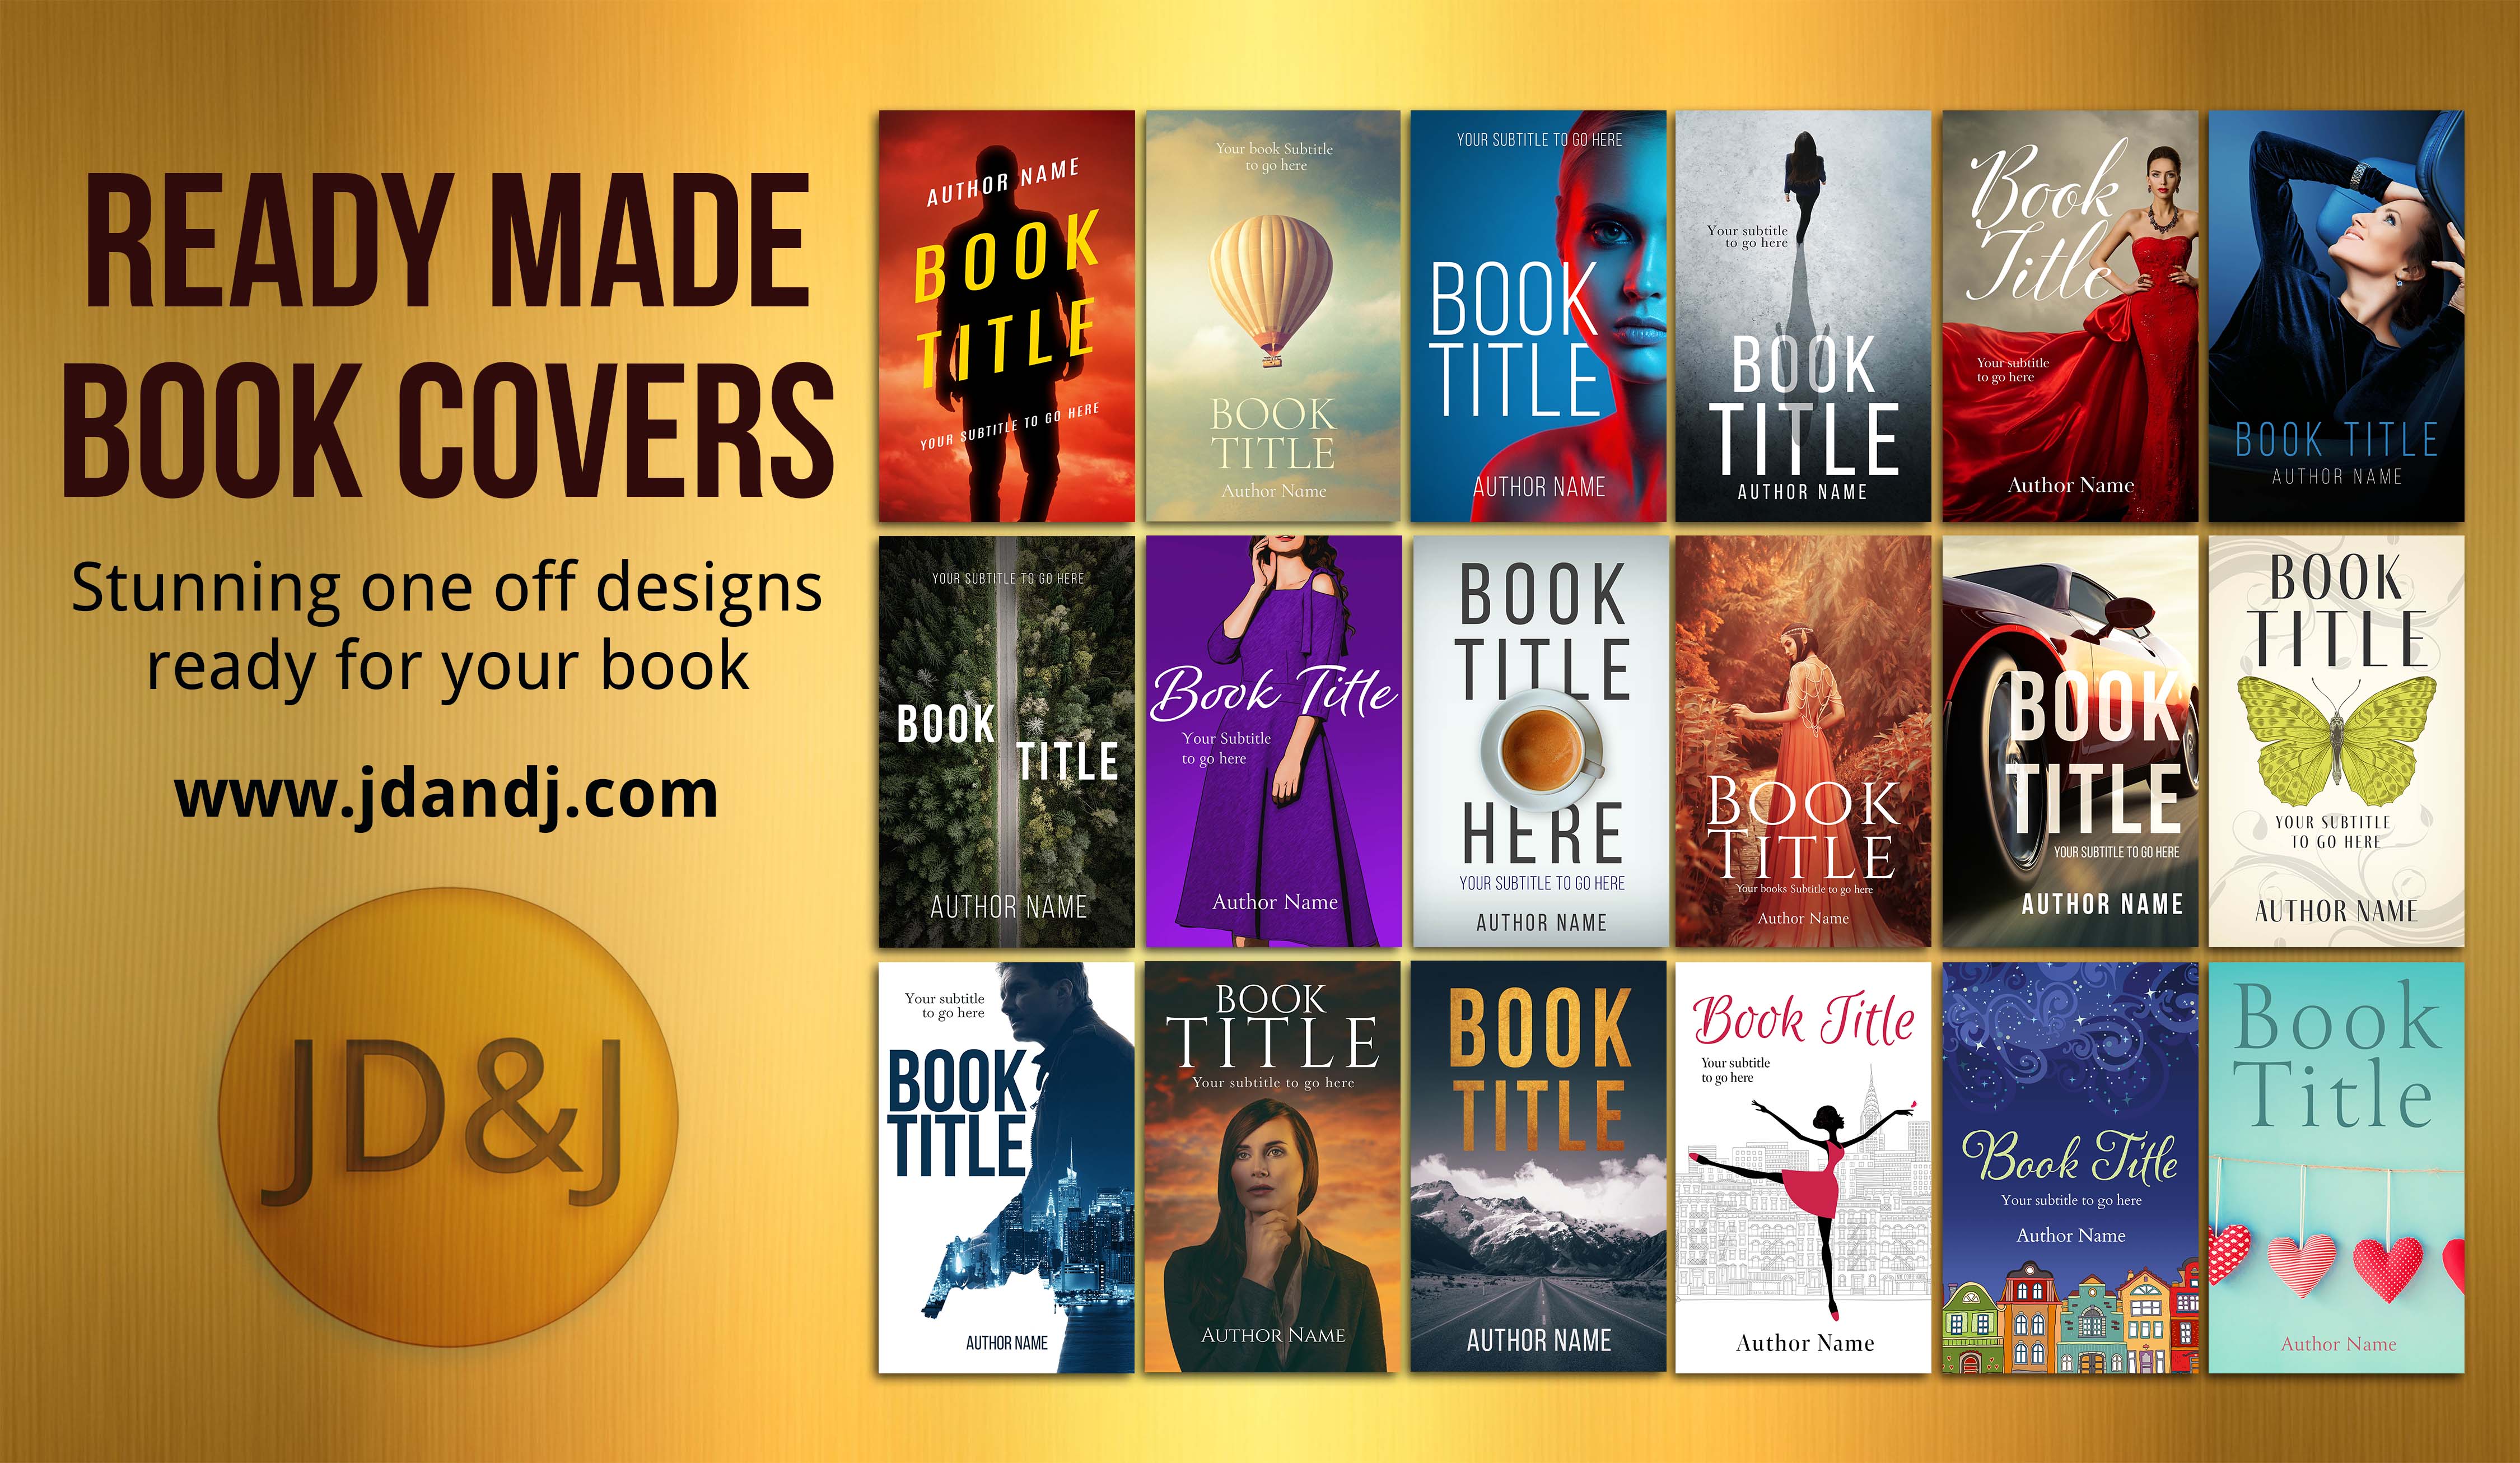 Win A Ready-Made Book Cover Design from JD&J Design.